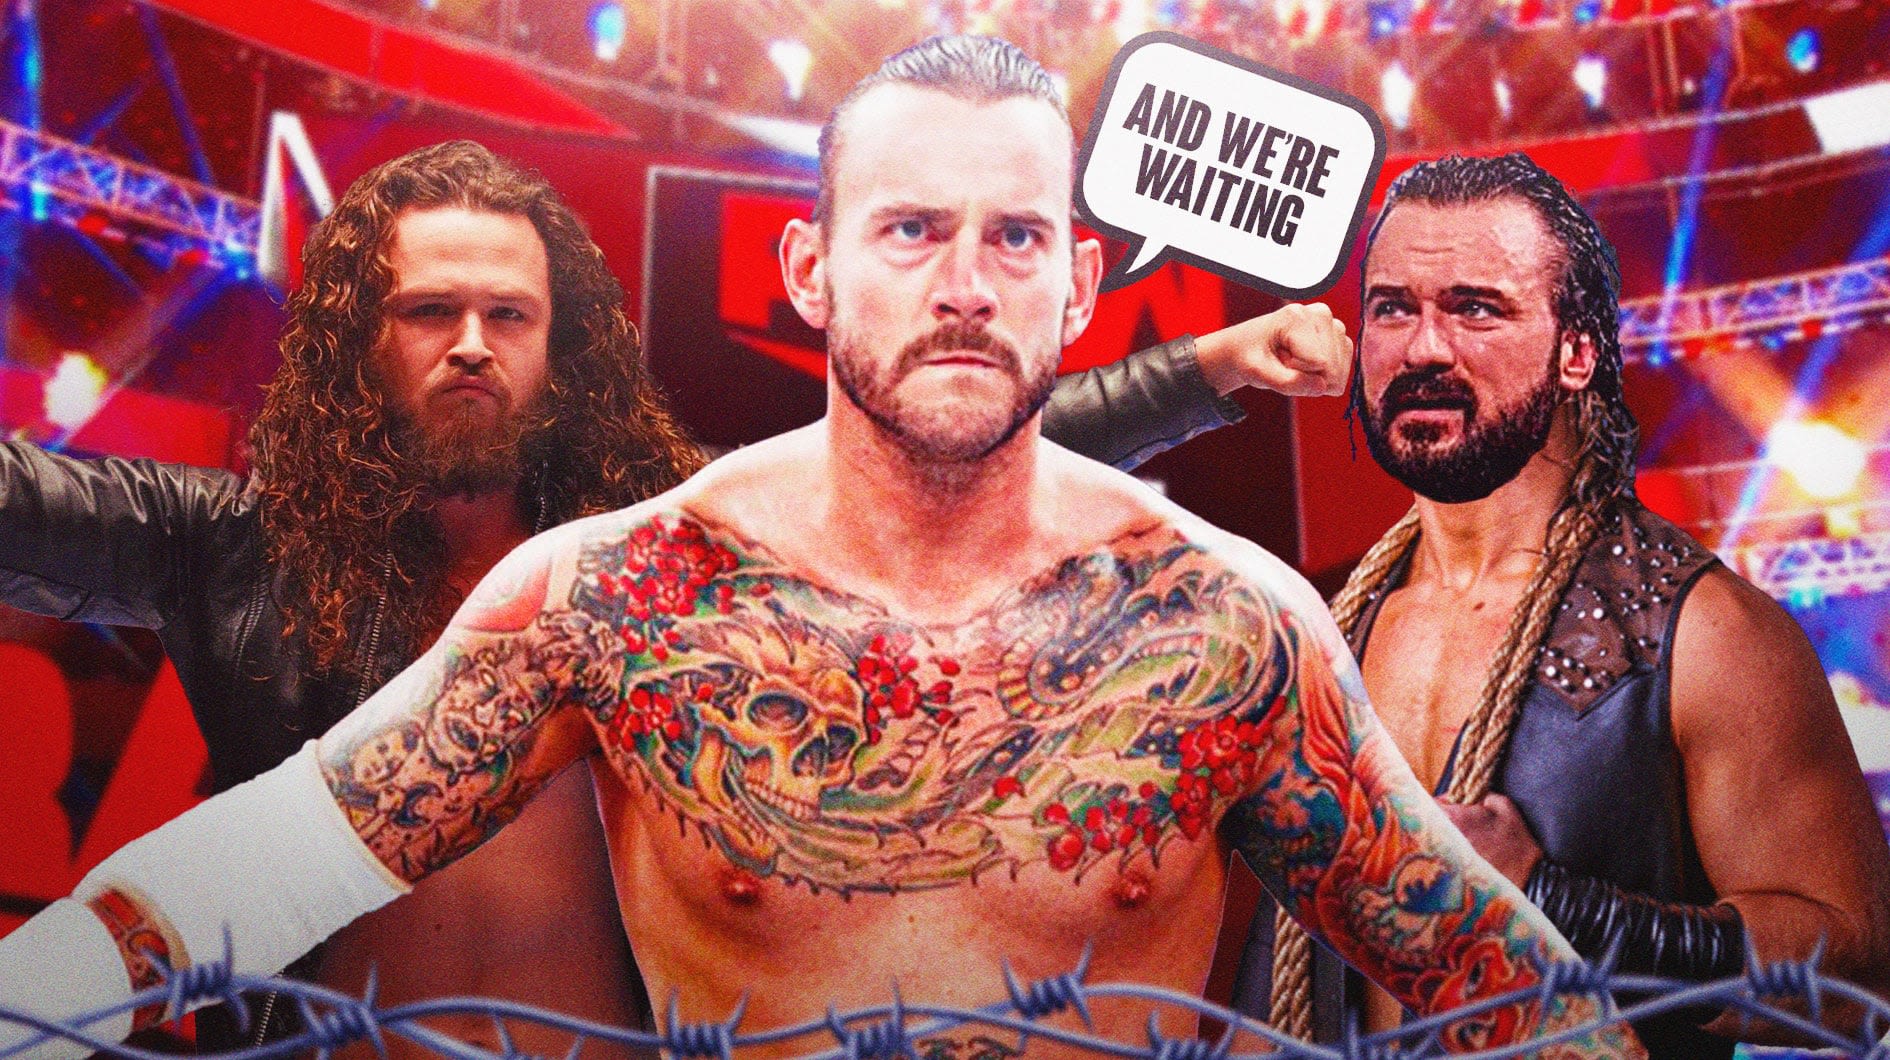 CM Punk references Jack Perry, cuts a 'coward s***'-style RAW promo on Drew McIntyre